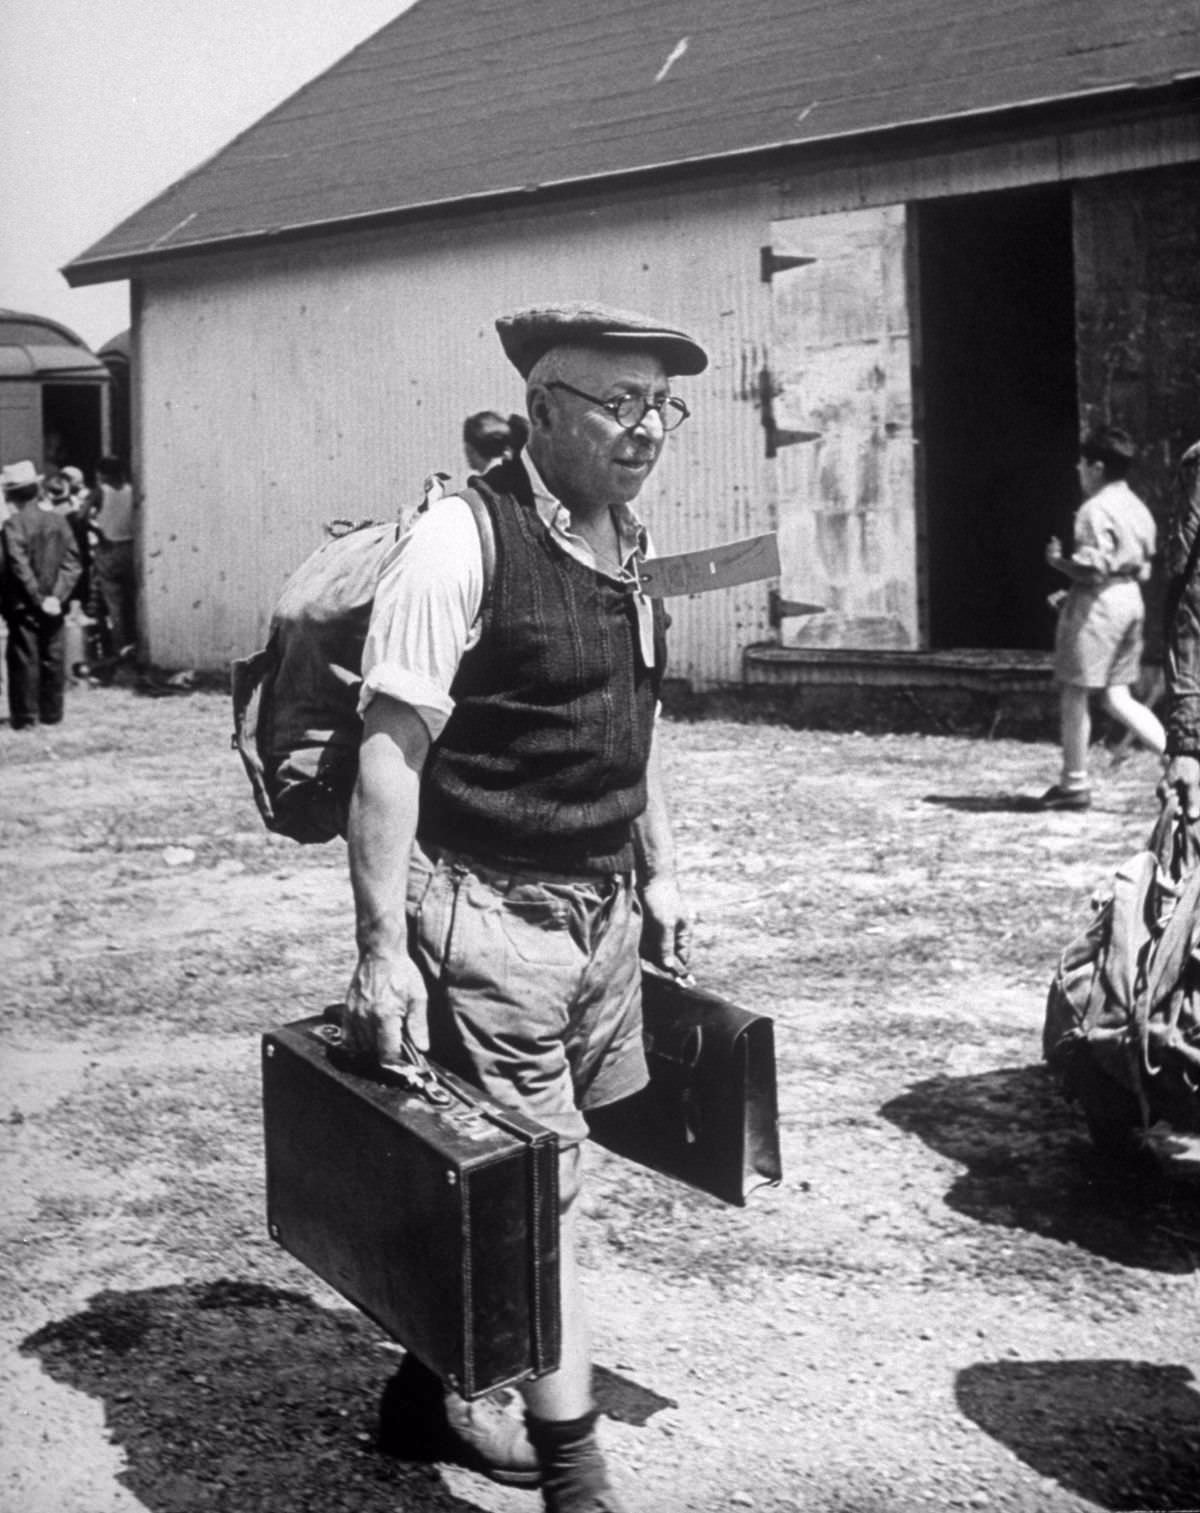 Refugees carried their own luggage to the customs depot. Boys from Oswego were hired to help but many refugees clung to possessions.